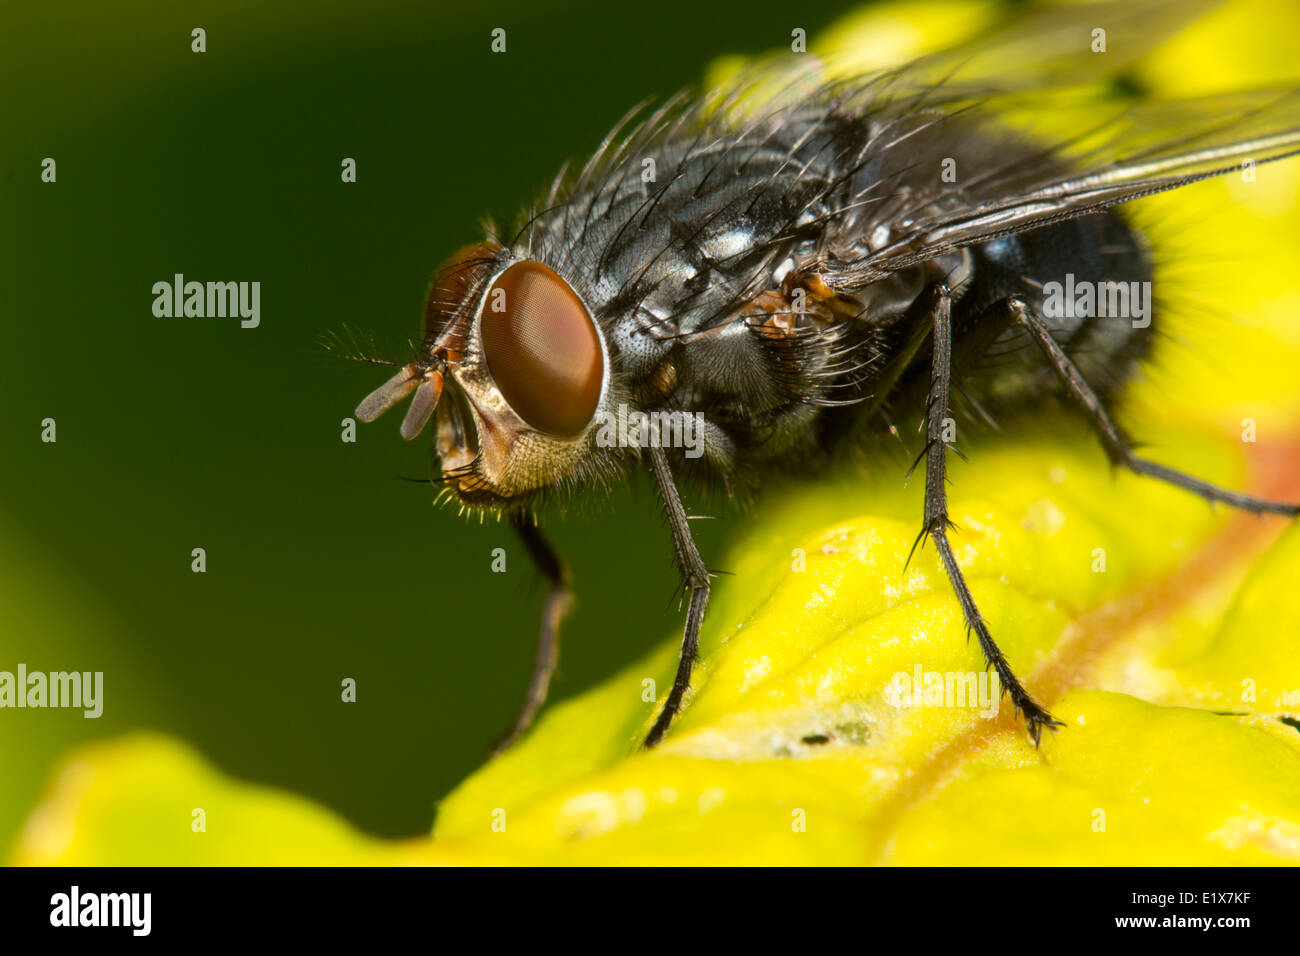 Calliphora vicina, a bluebottle blowfly male fly Stock Photo